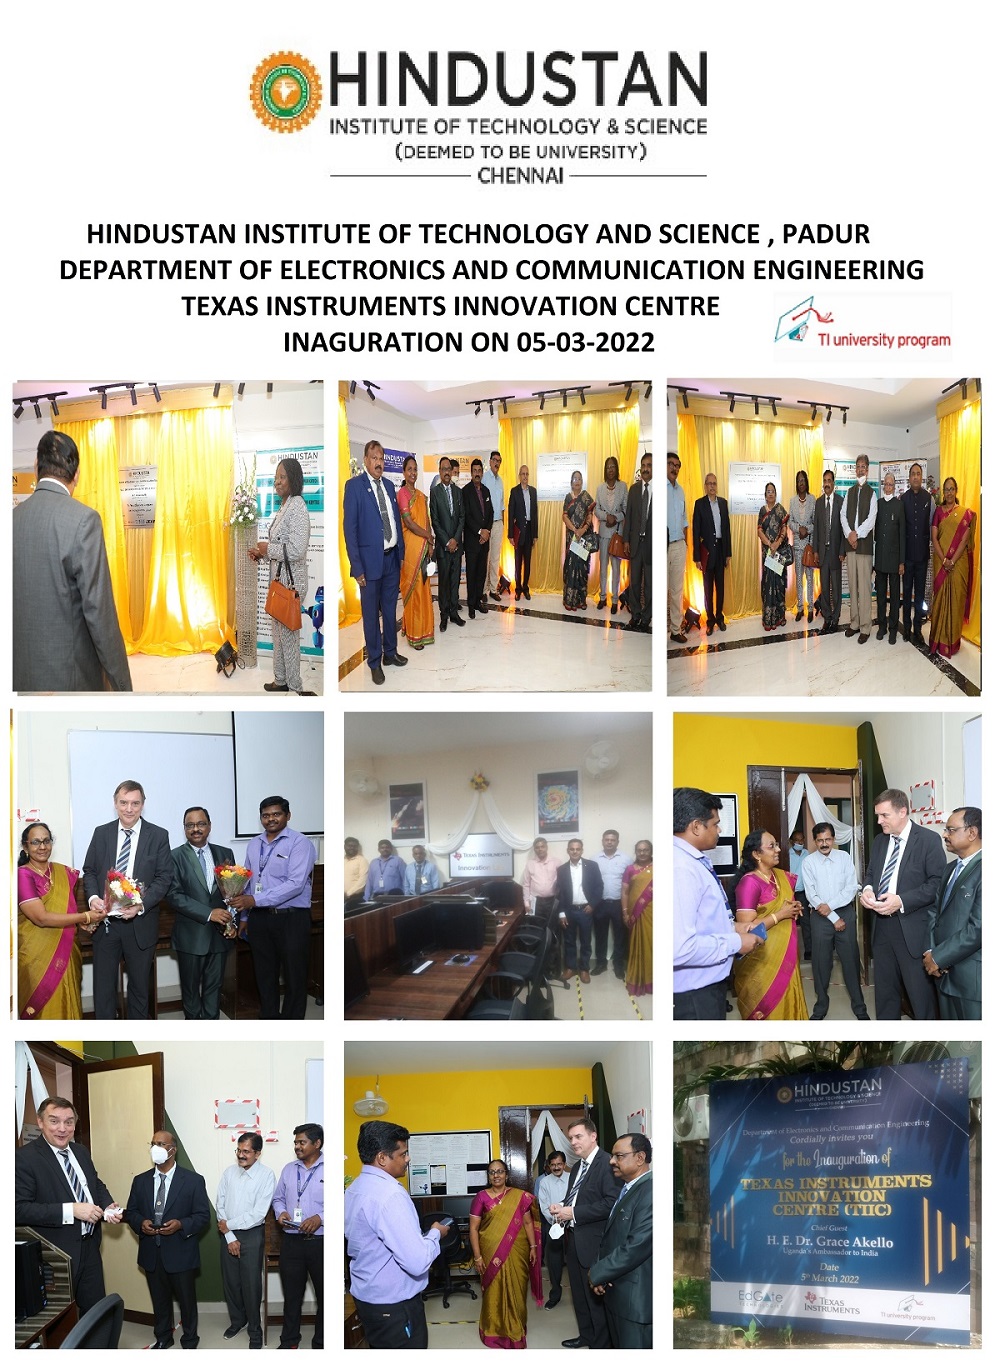 Inauguration of Texas Instruments Innovation Centre